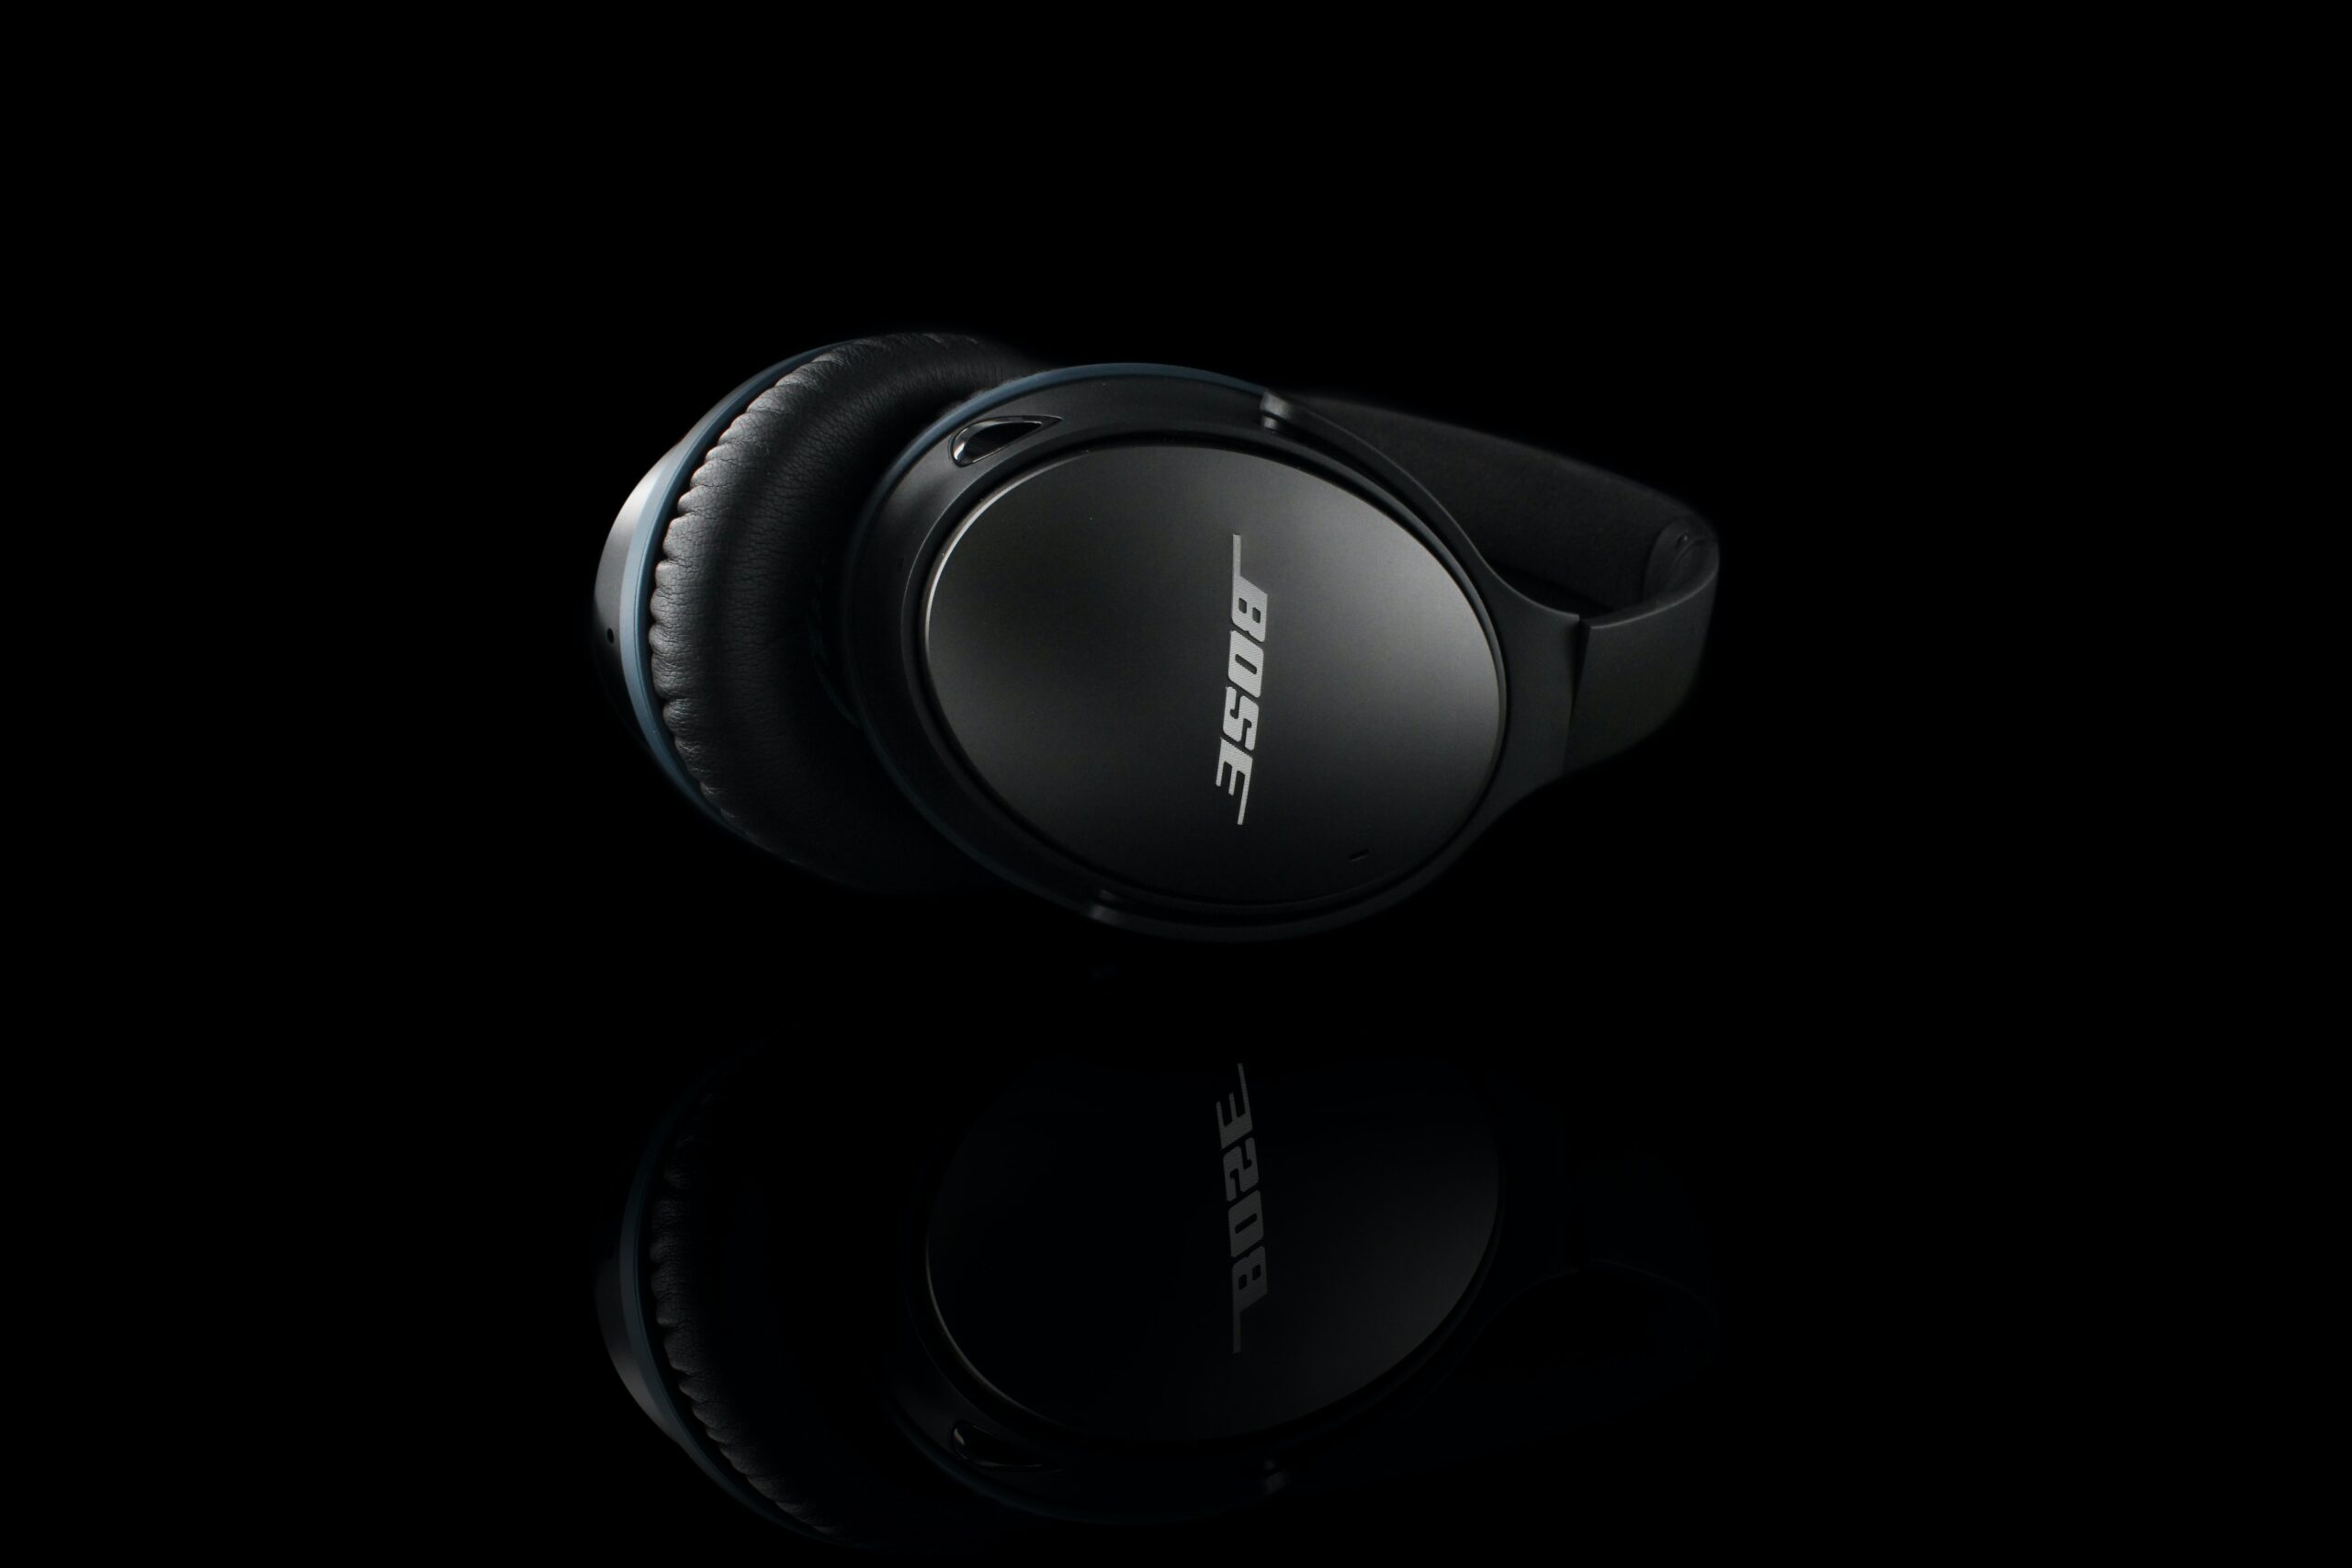 Why Is Bose So Expensive?